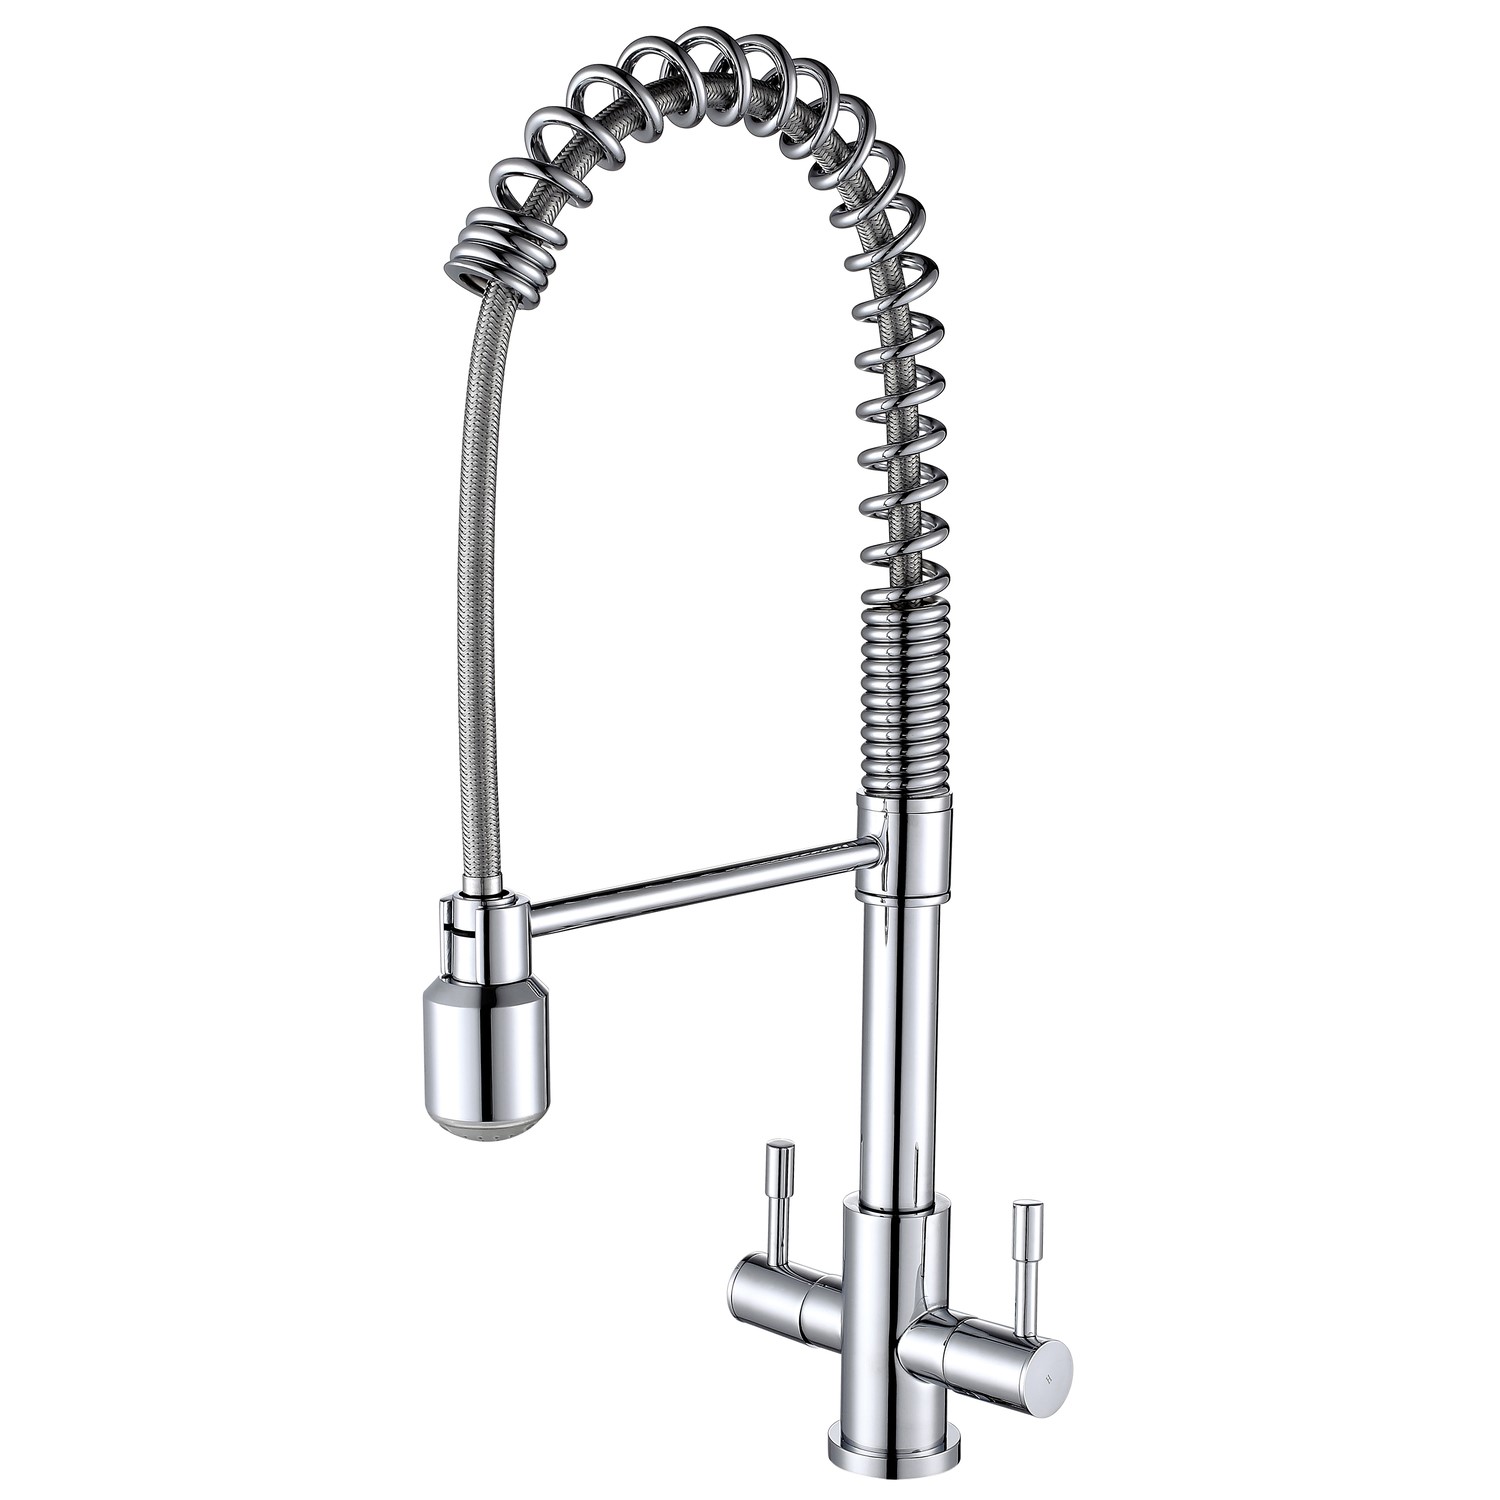 Taylor & Moore TMT034 Pull Out Kitchen Sink Mixer Tap